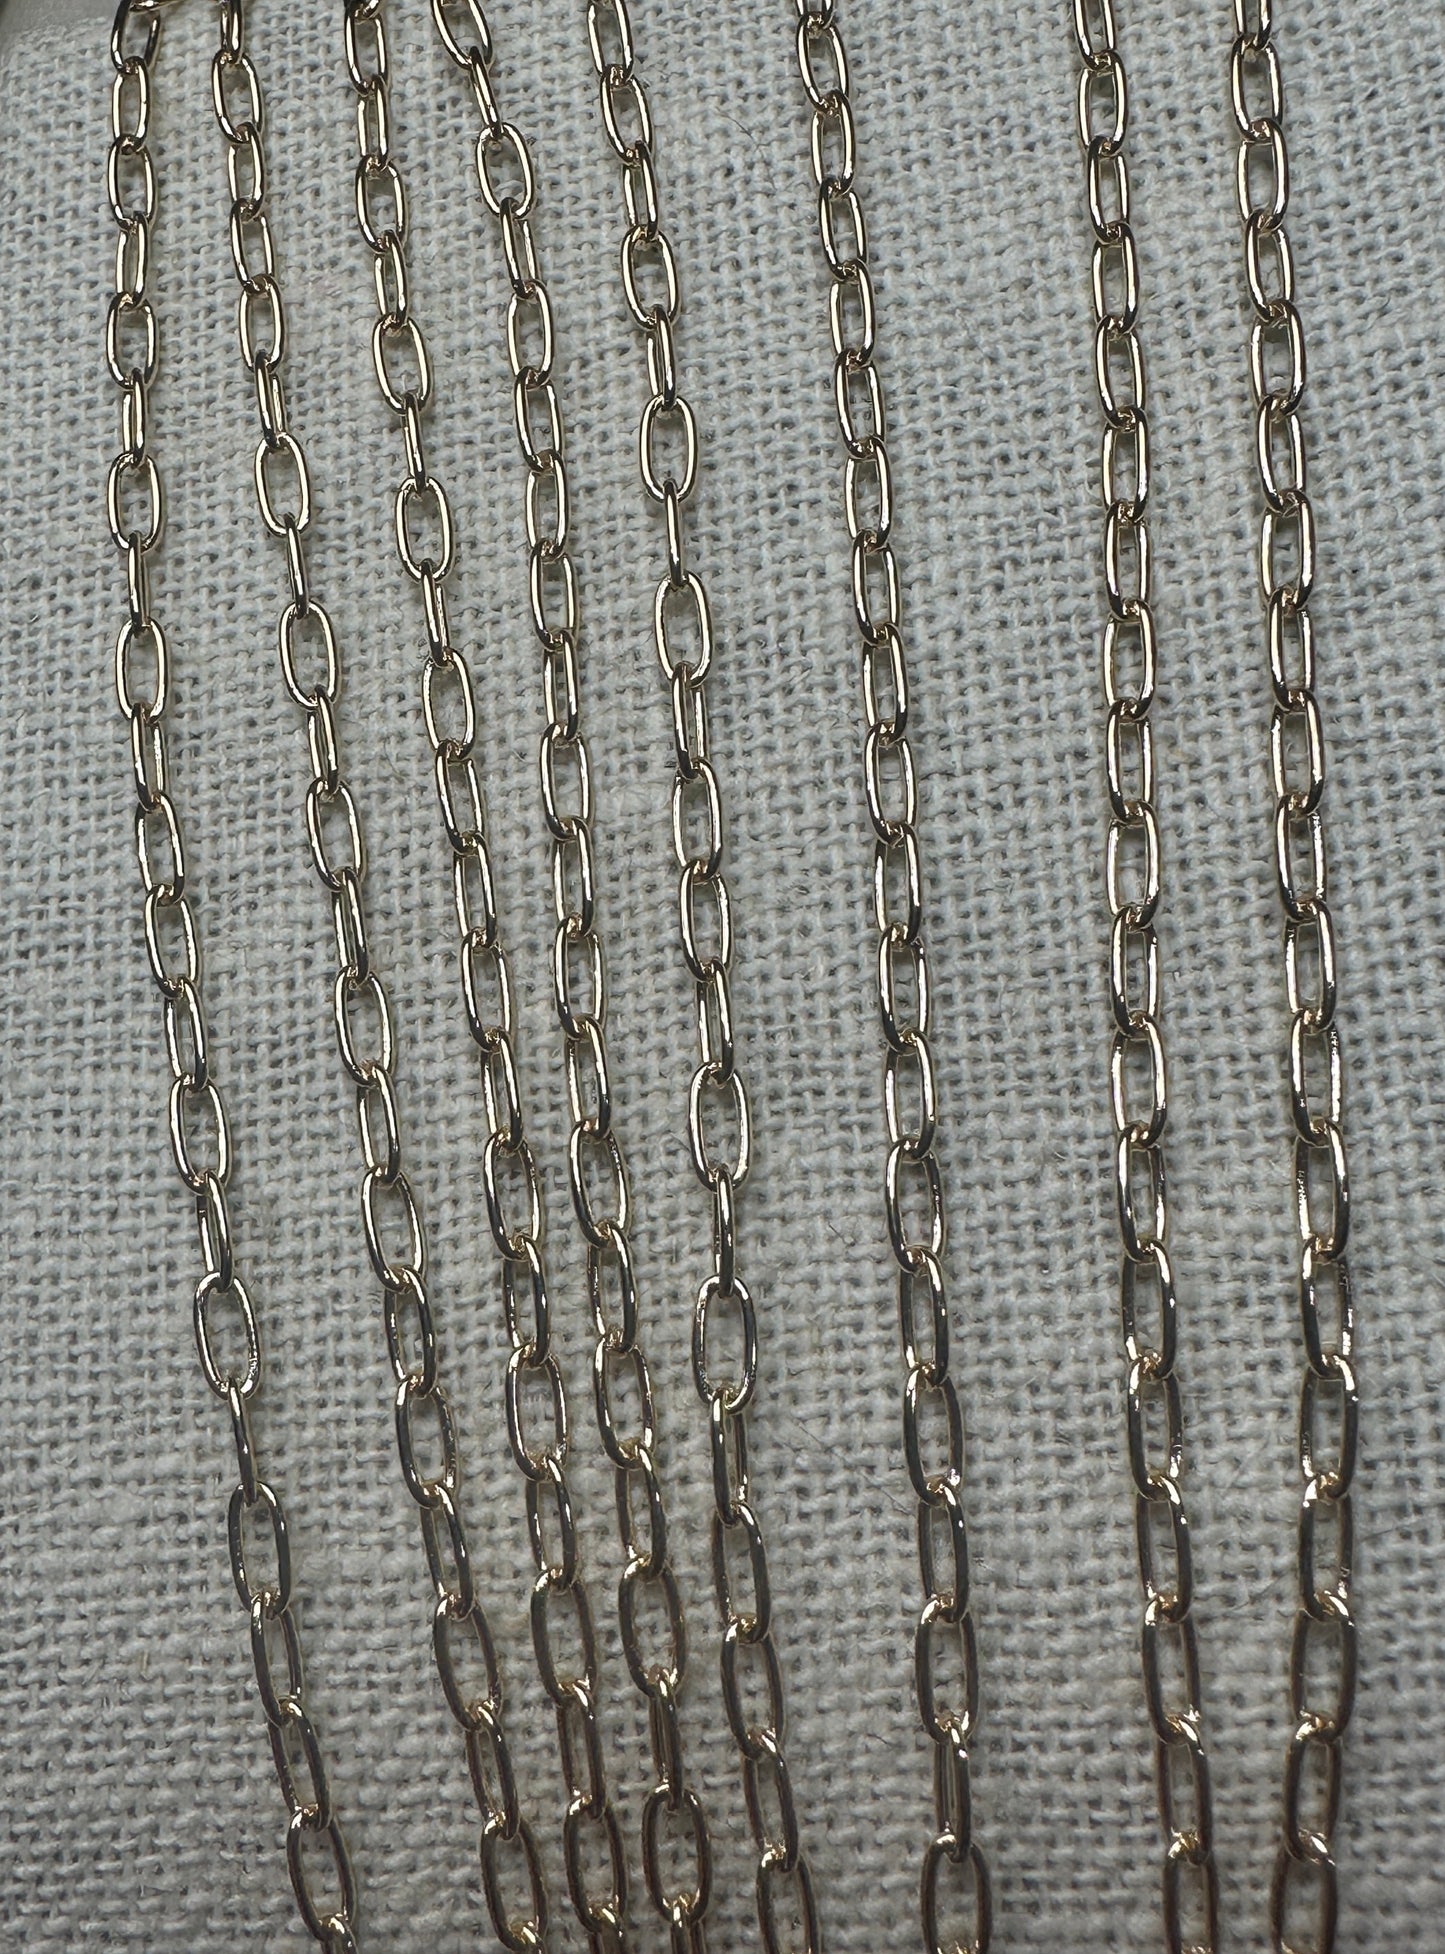 Cable Link Necklace